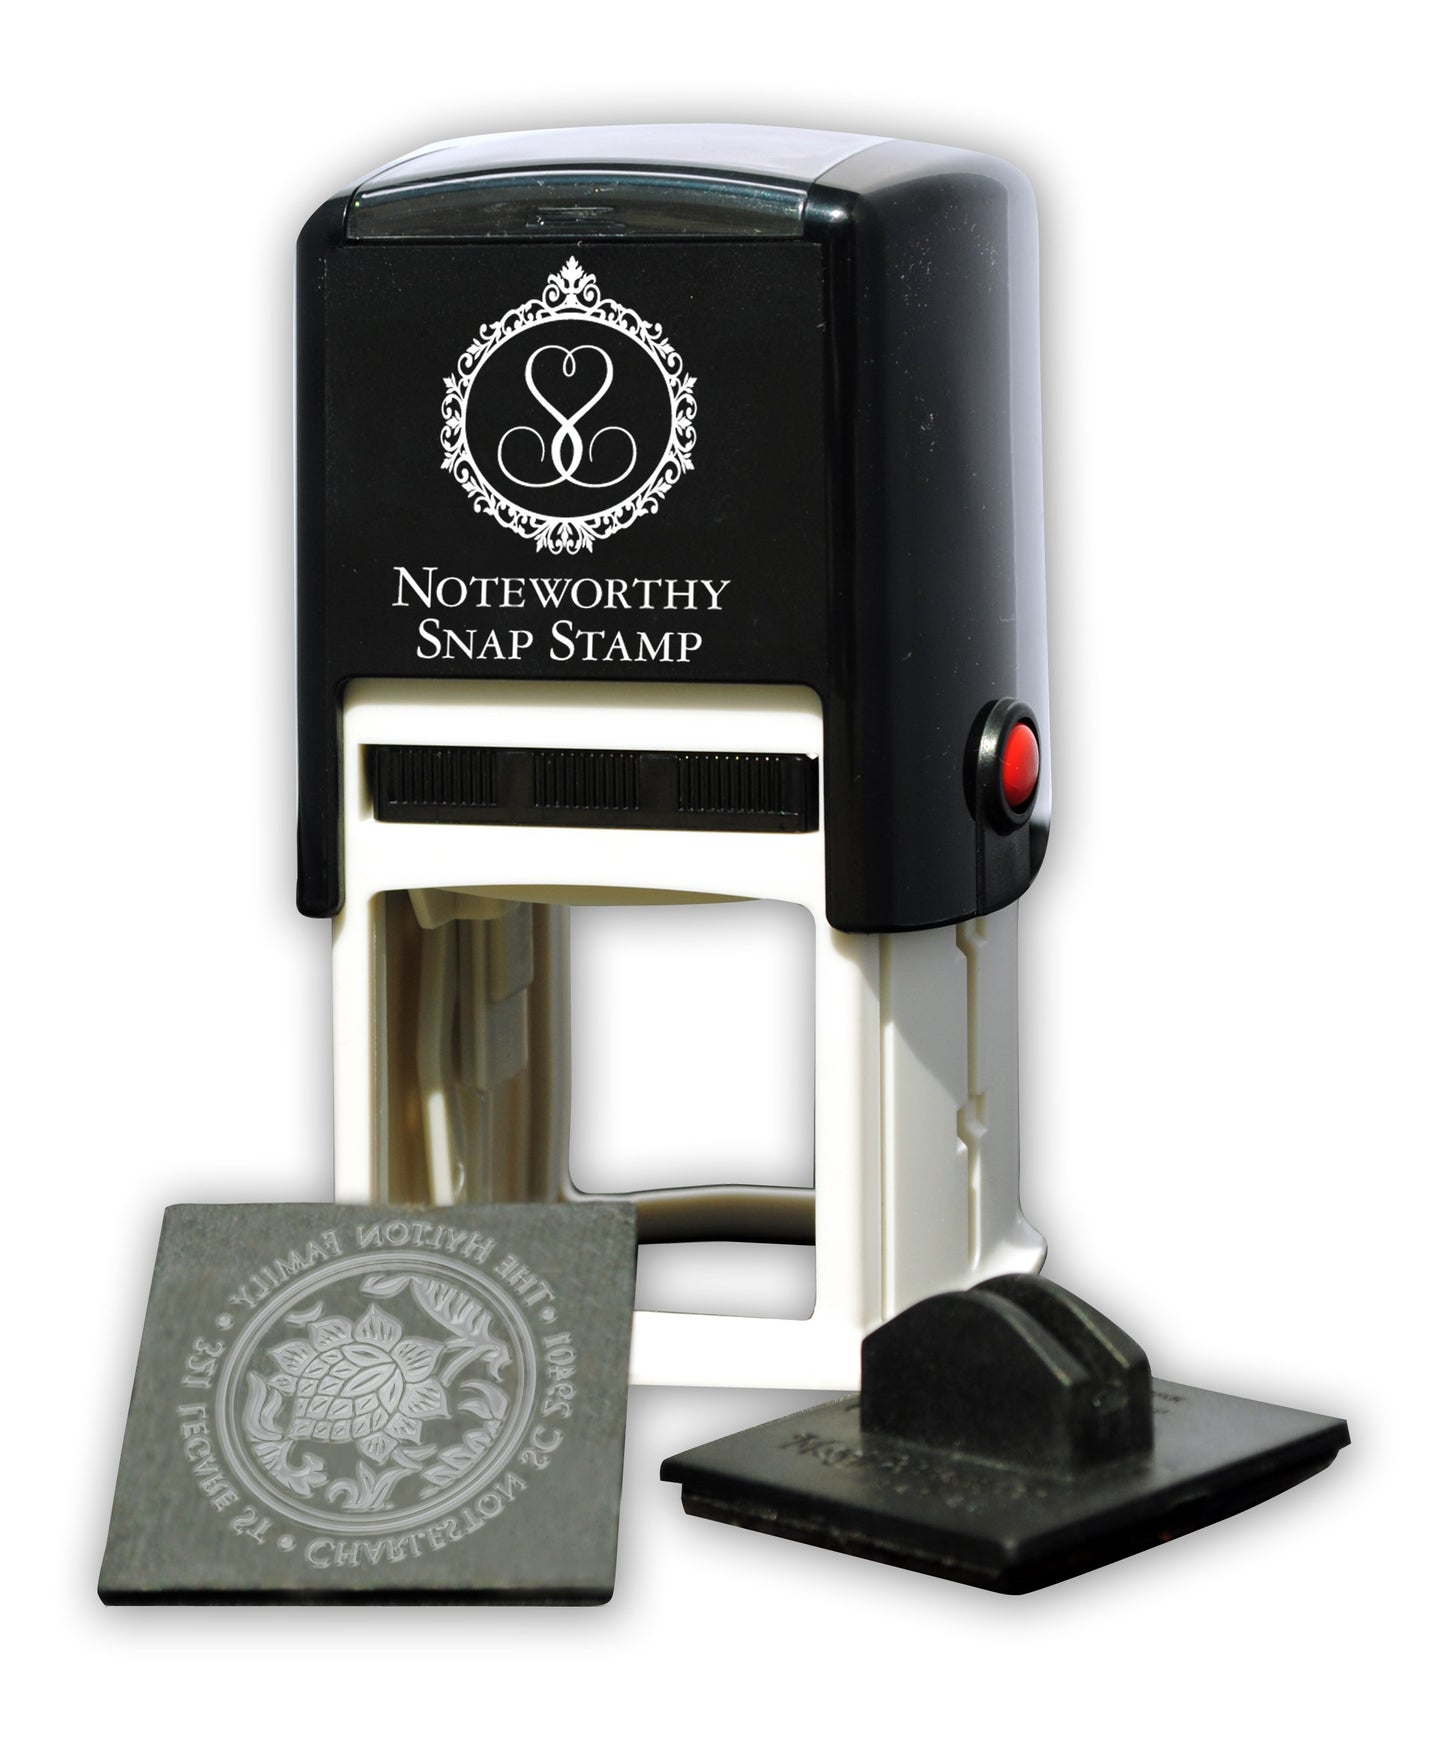 Capital of Texas Square Stamper or Embosser